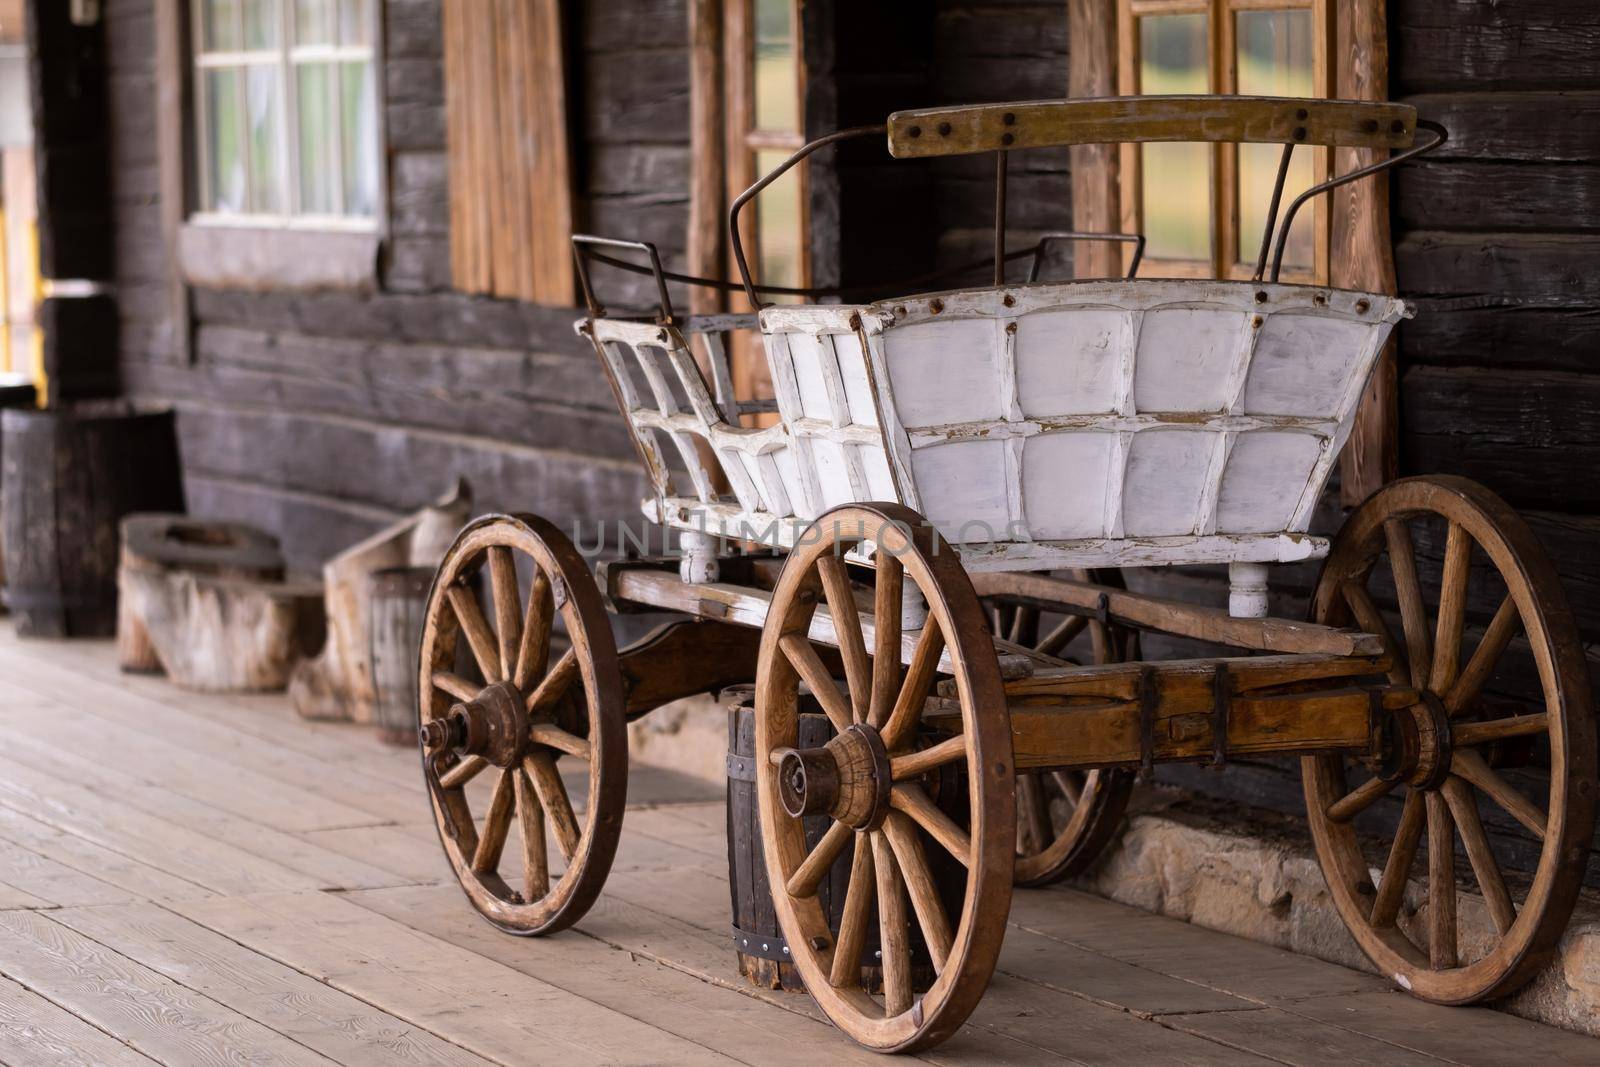 An empty antique carriage stands on a ranch in the wild West by Lobachad